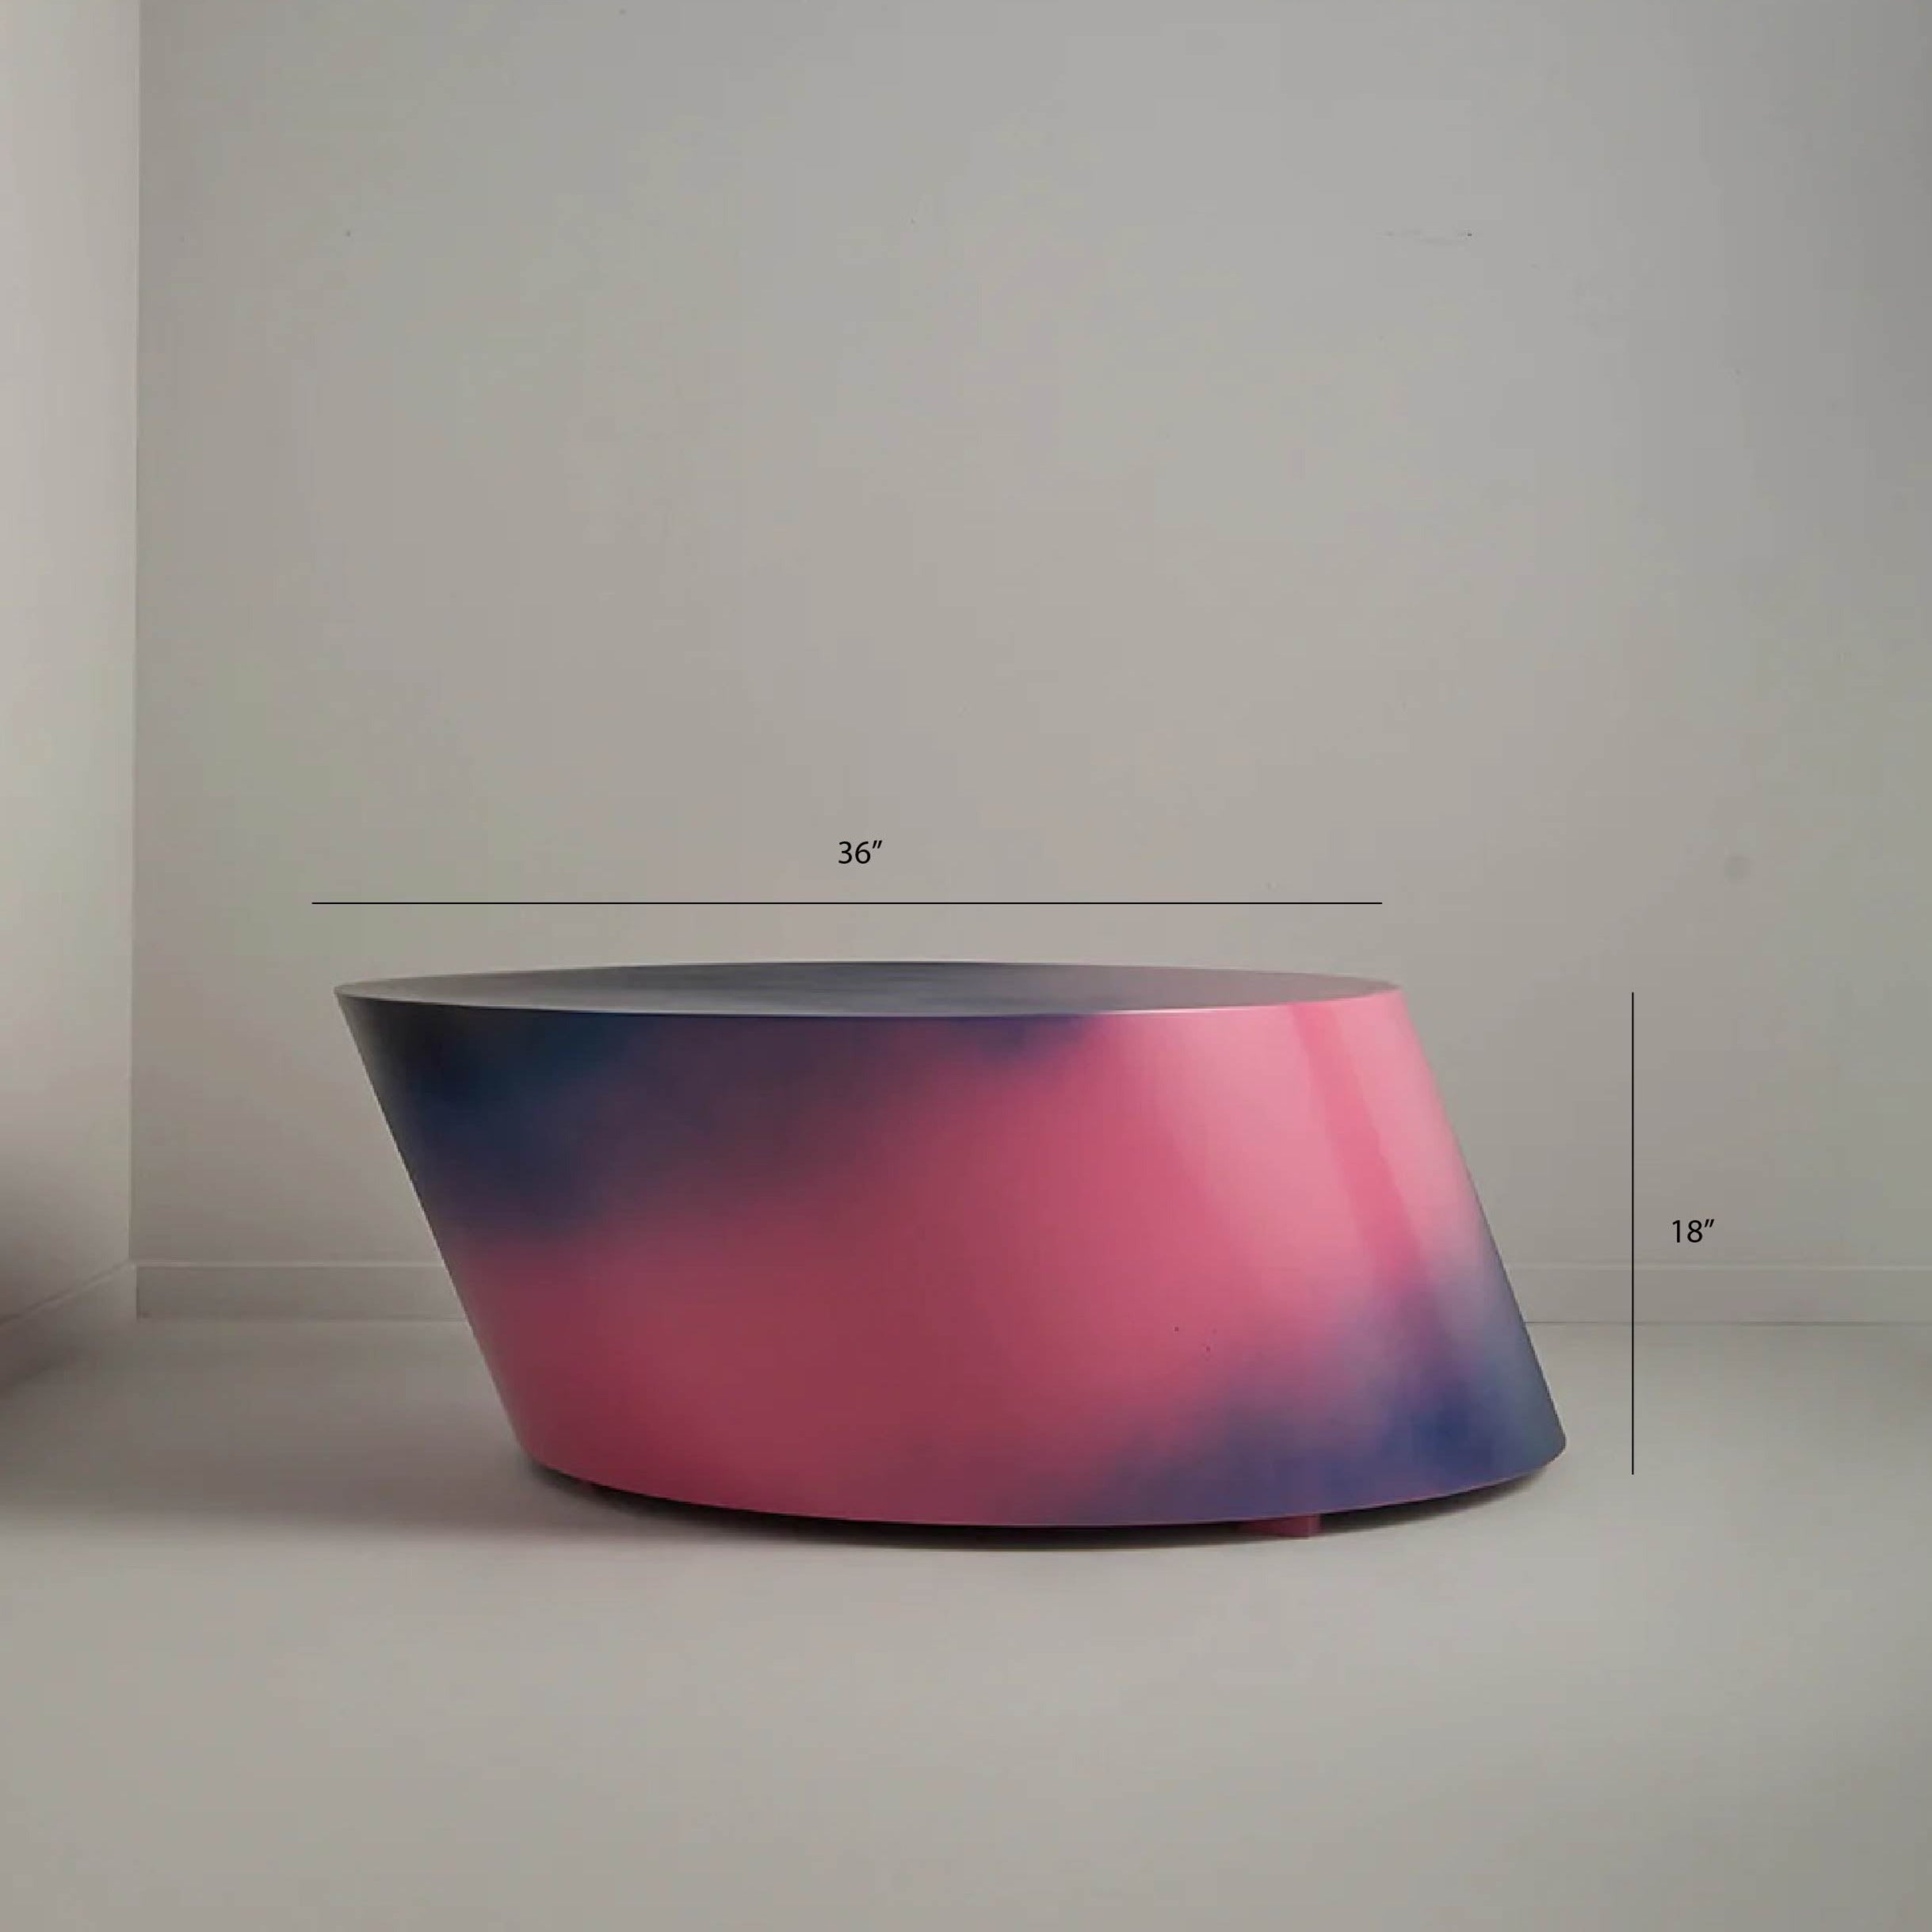 Sunset Coffee Table